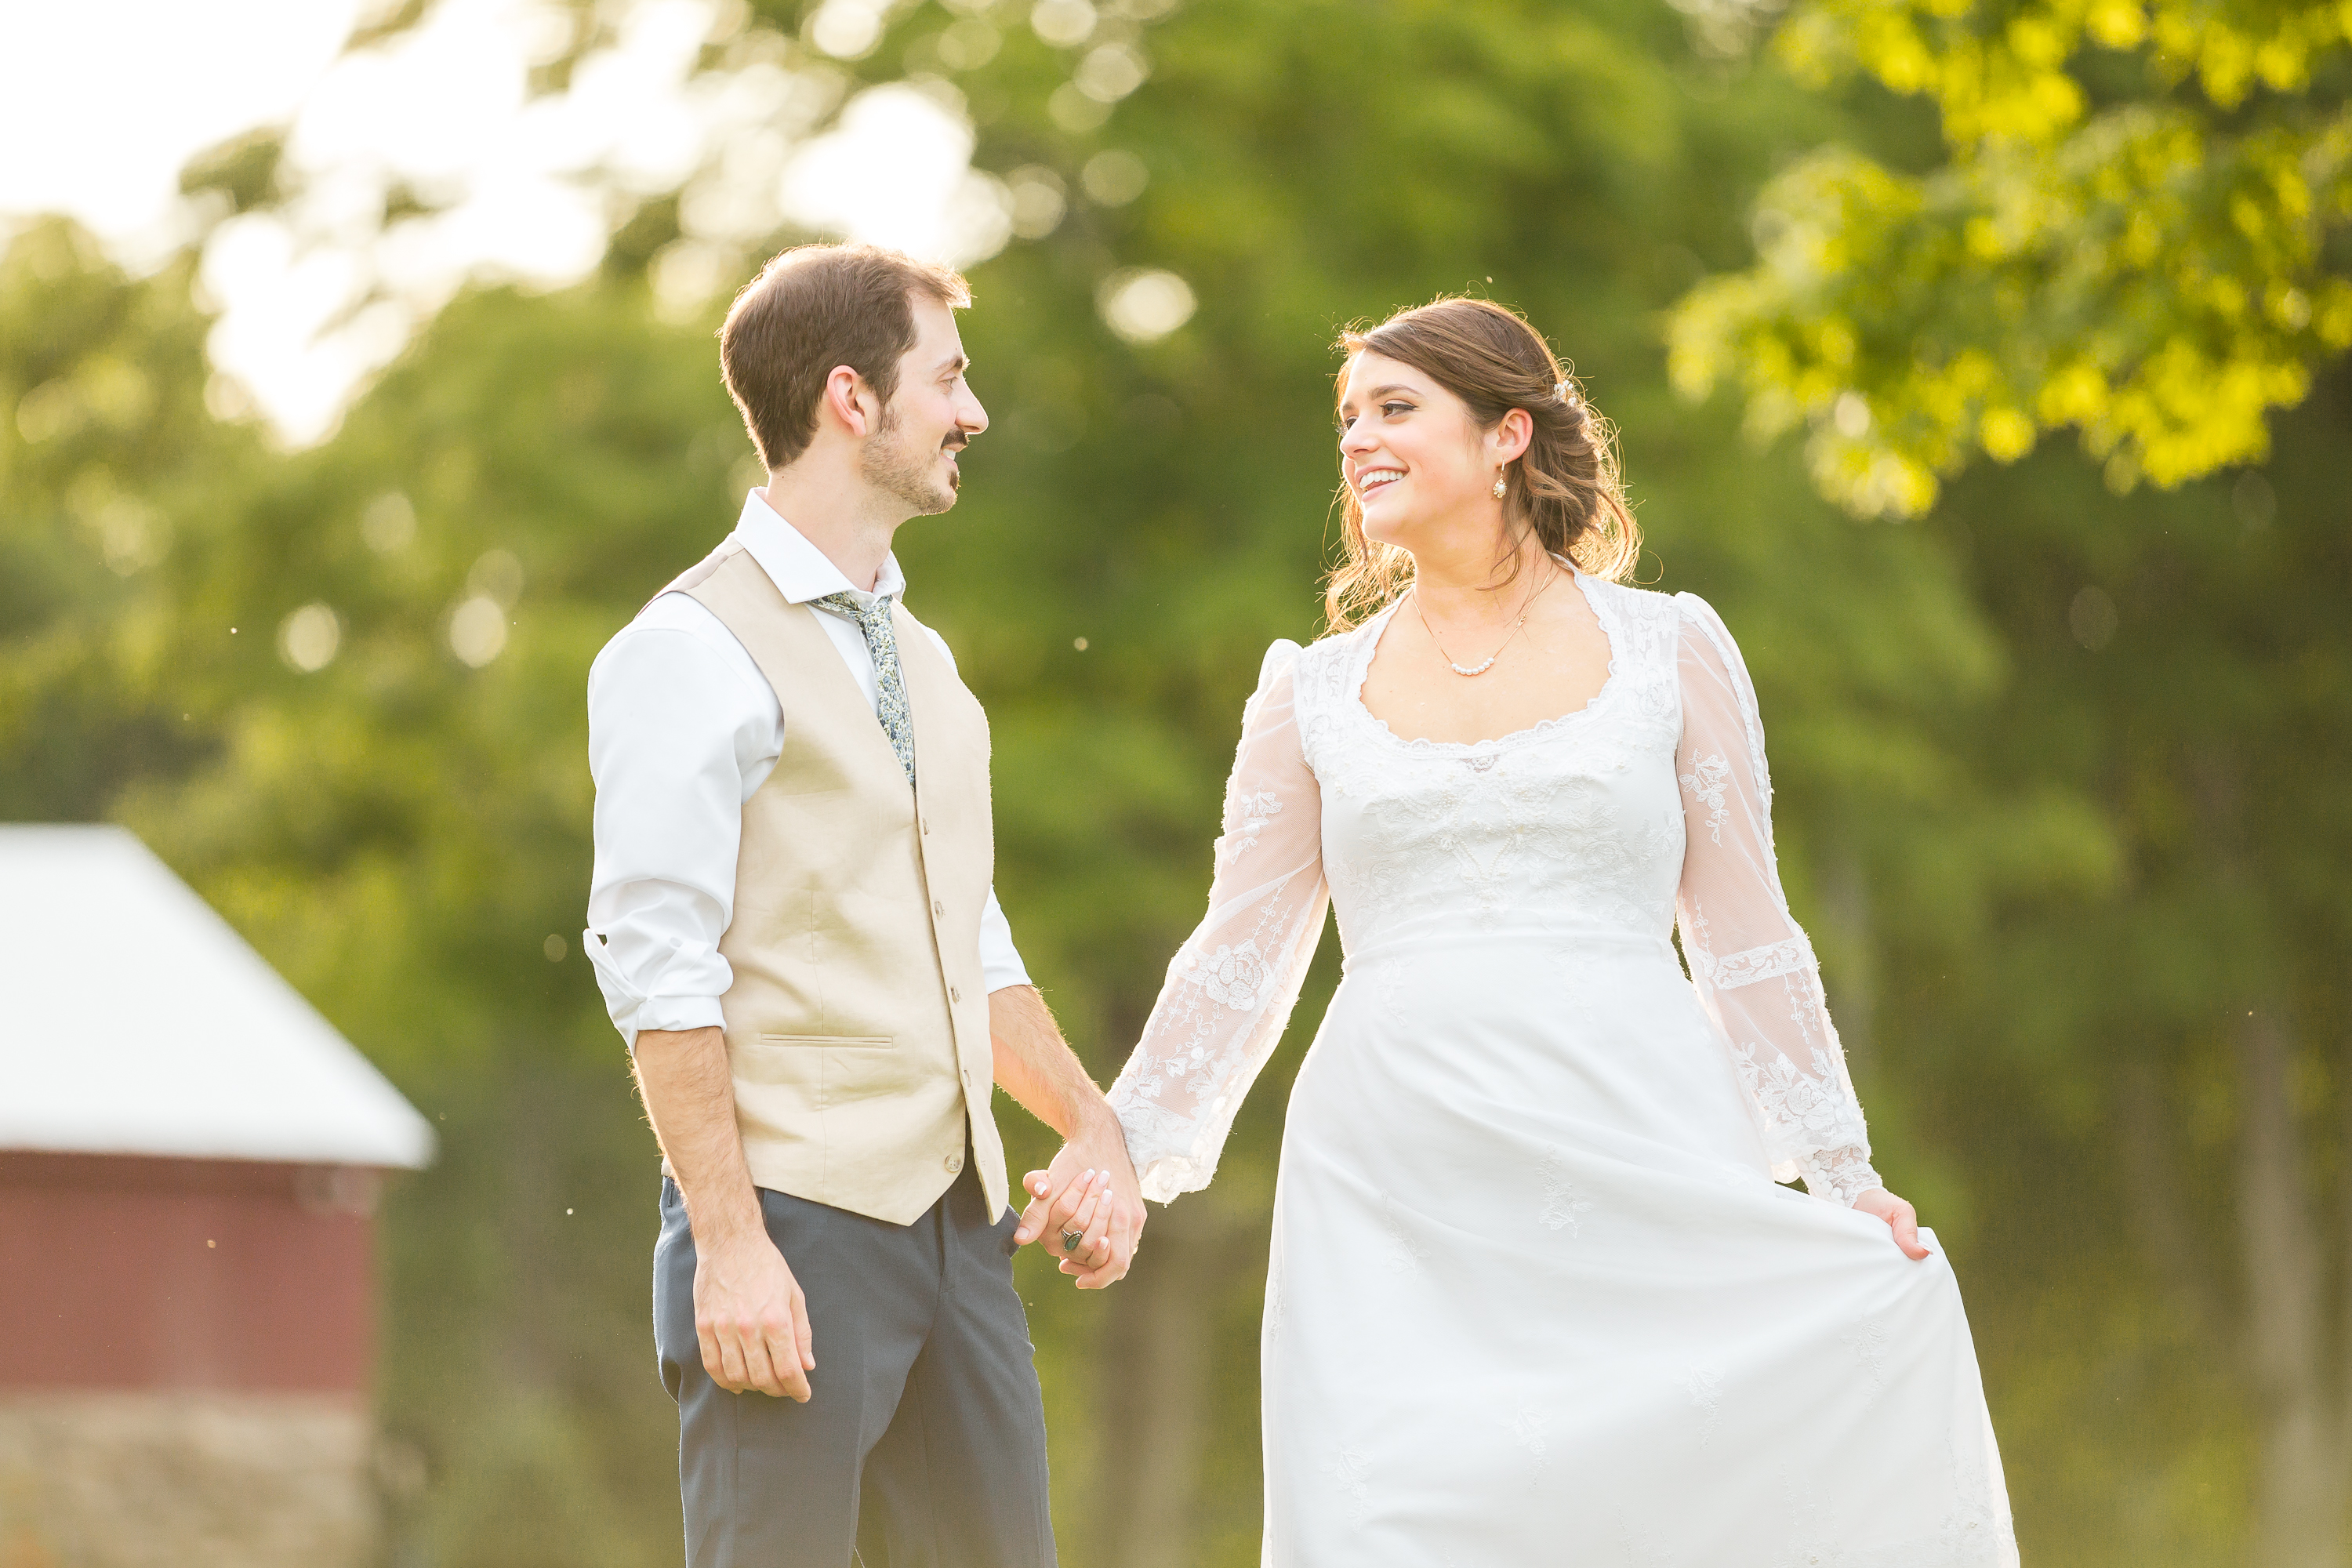 Beautiful bride and groom at Parmelee Farm Wedding in Killingworth CT by Jamerlyn Brown Photography